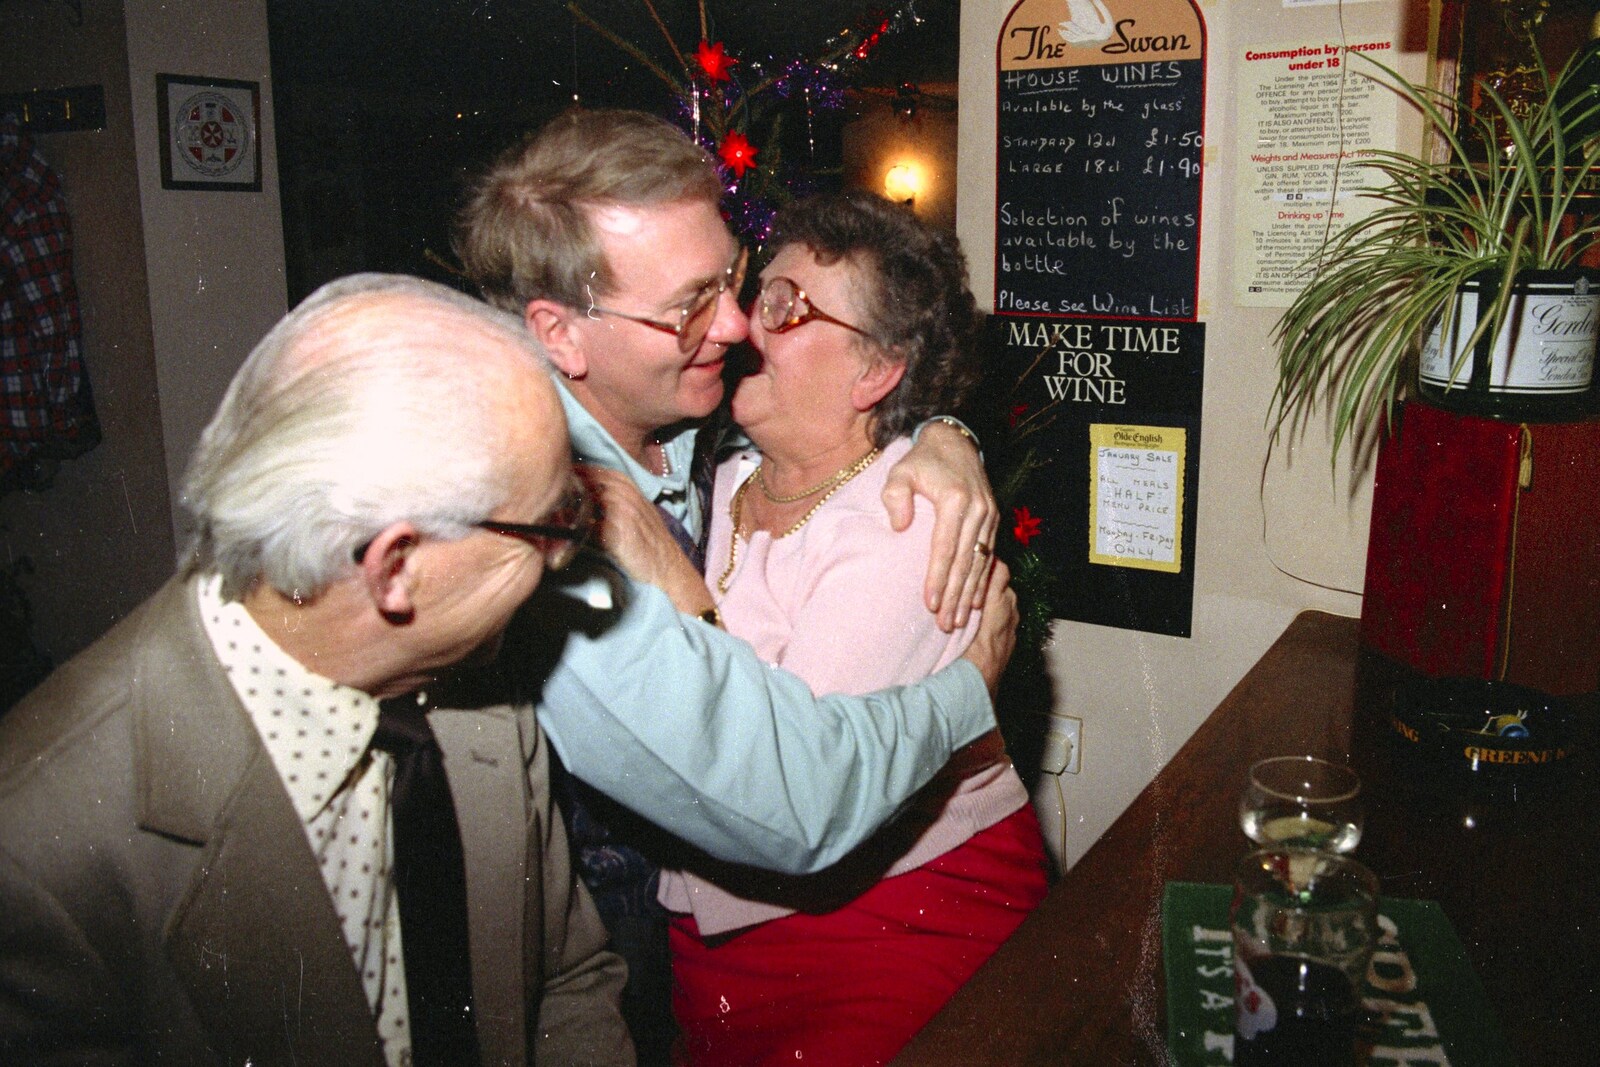 Arline gives John Willy a snog from New Year's Eve at the Swan Inn, Brome, Suffolk - 31st December 1994